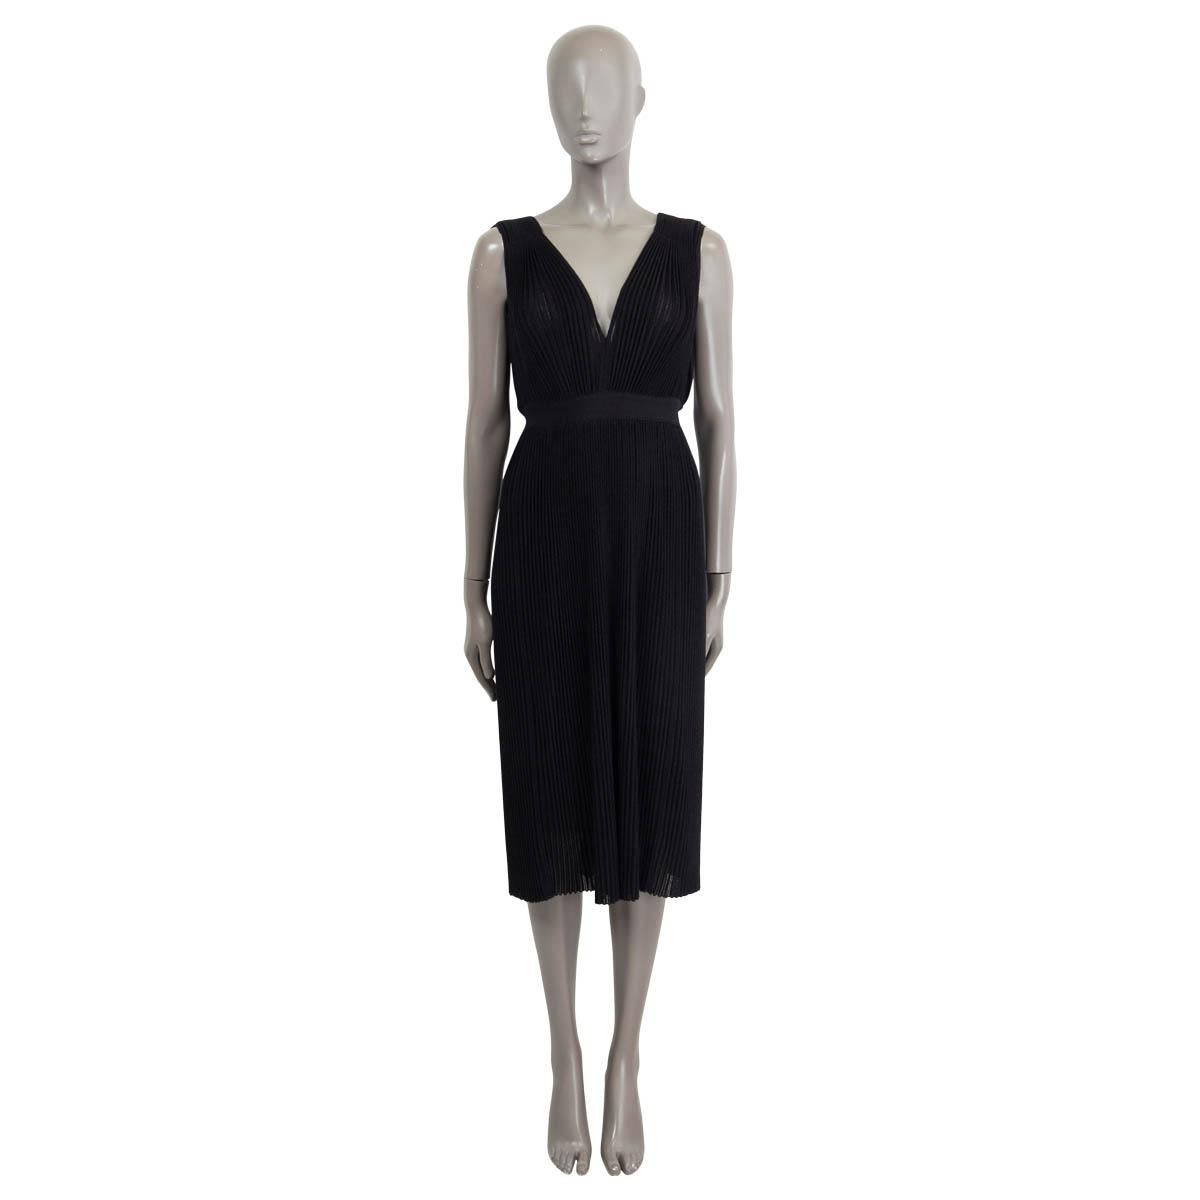 100% authentic Christian Dior sleeveless pleated midi dress in black wool and cashmere (assumed cause tag is missing). Opens with a zipper on the back. Unlined. Has been worn and is in excellent condition.

Measurements
Tag Size	Missing Tag